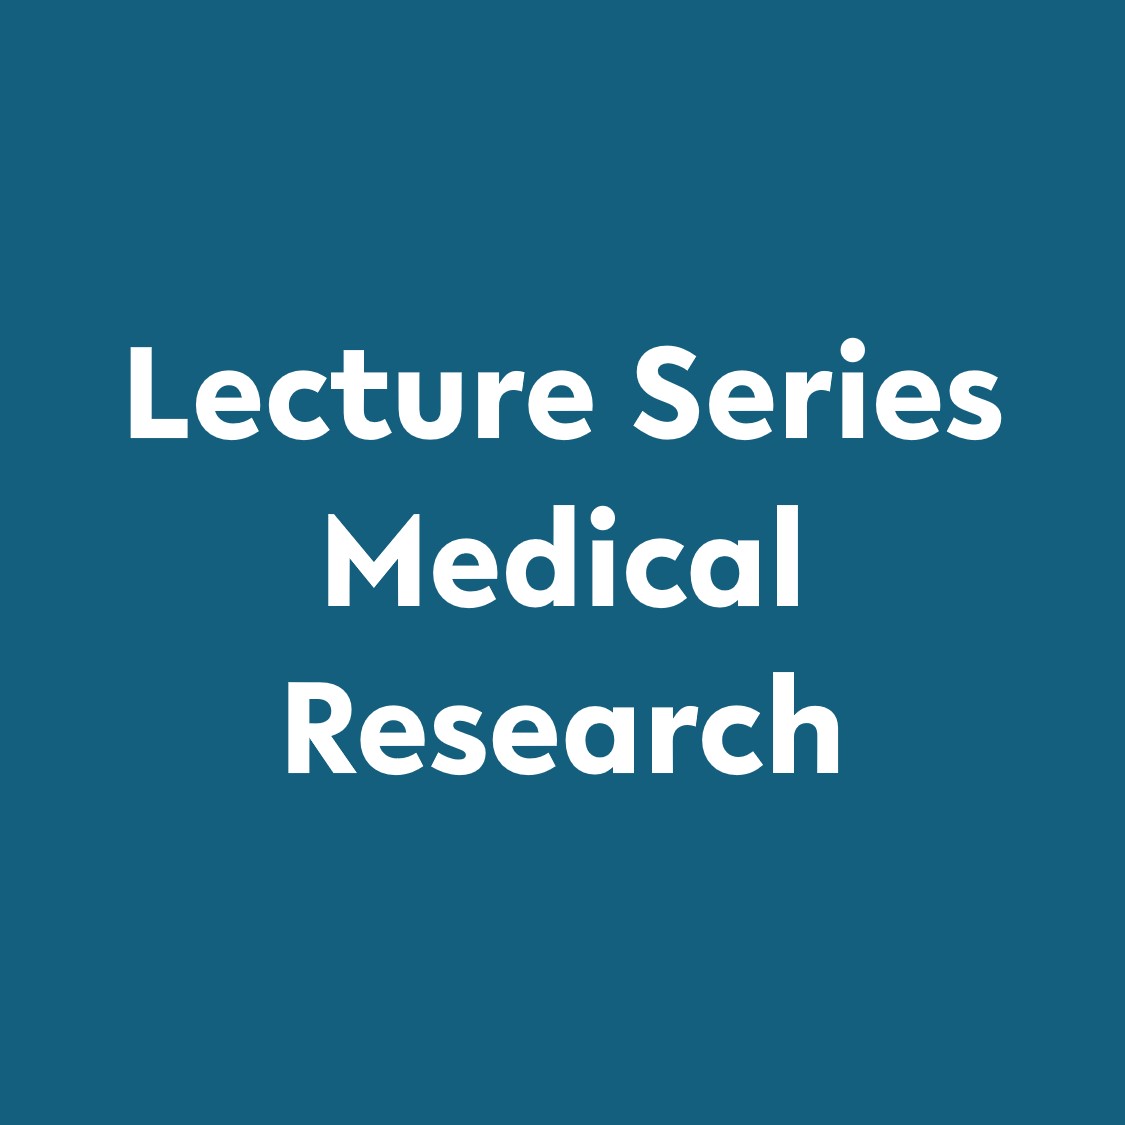 Blue Square with Text: Lecture Series Medical Research